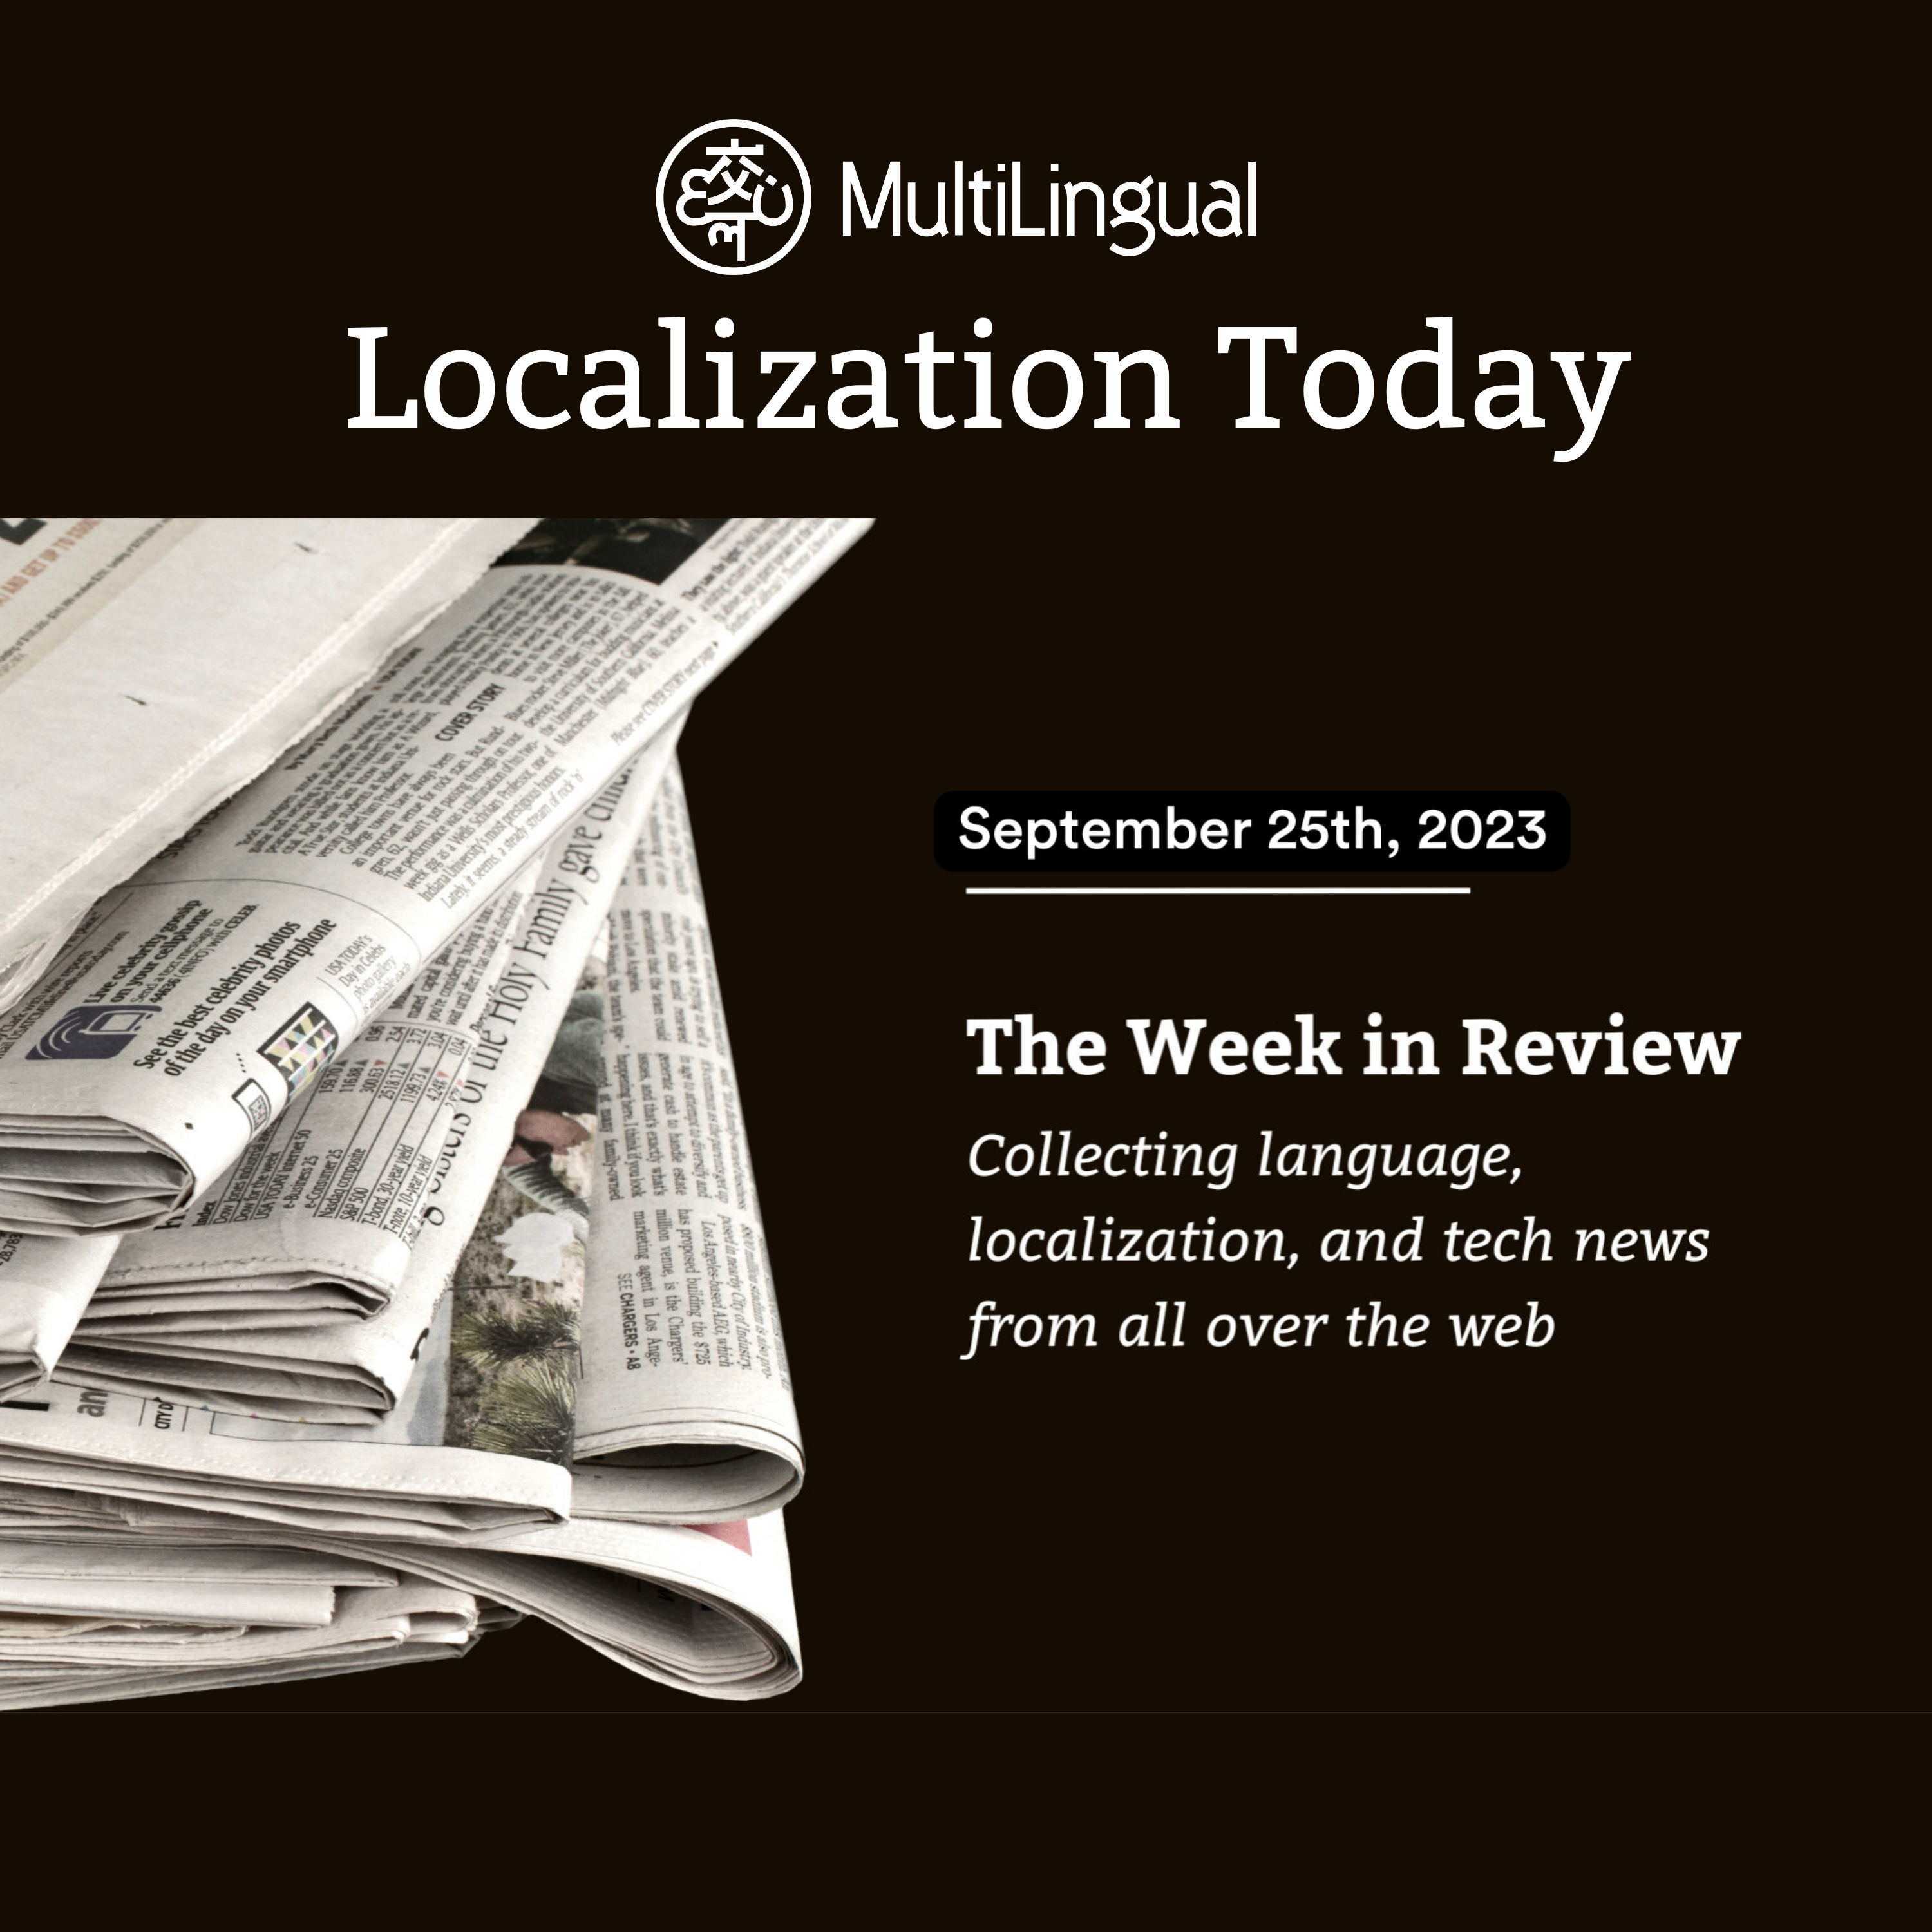 The Week in Review: September 25, 2023